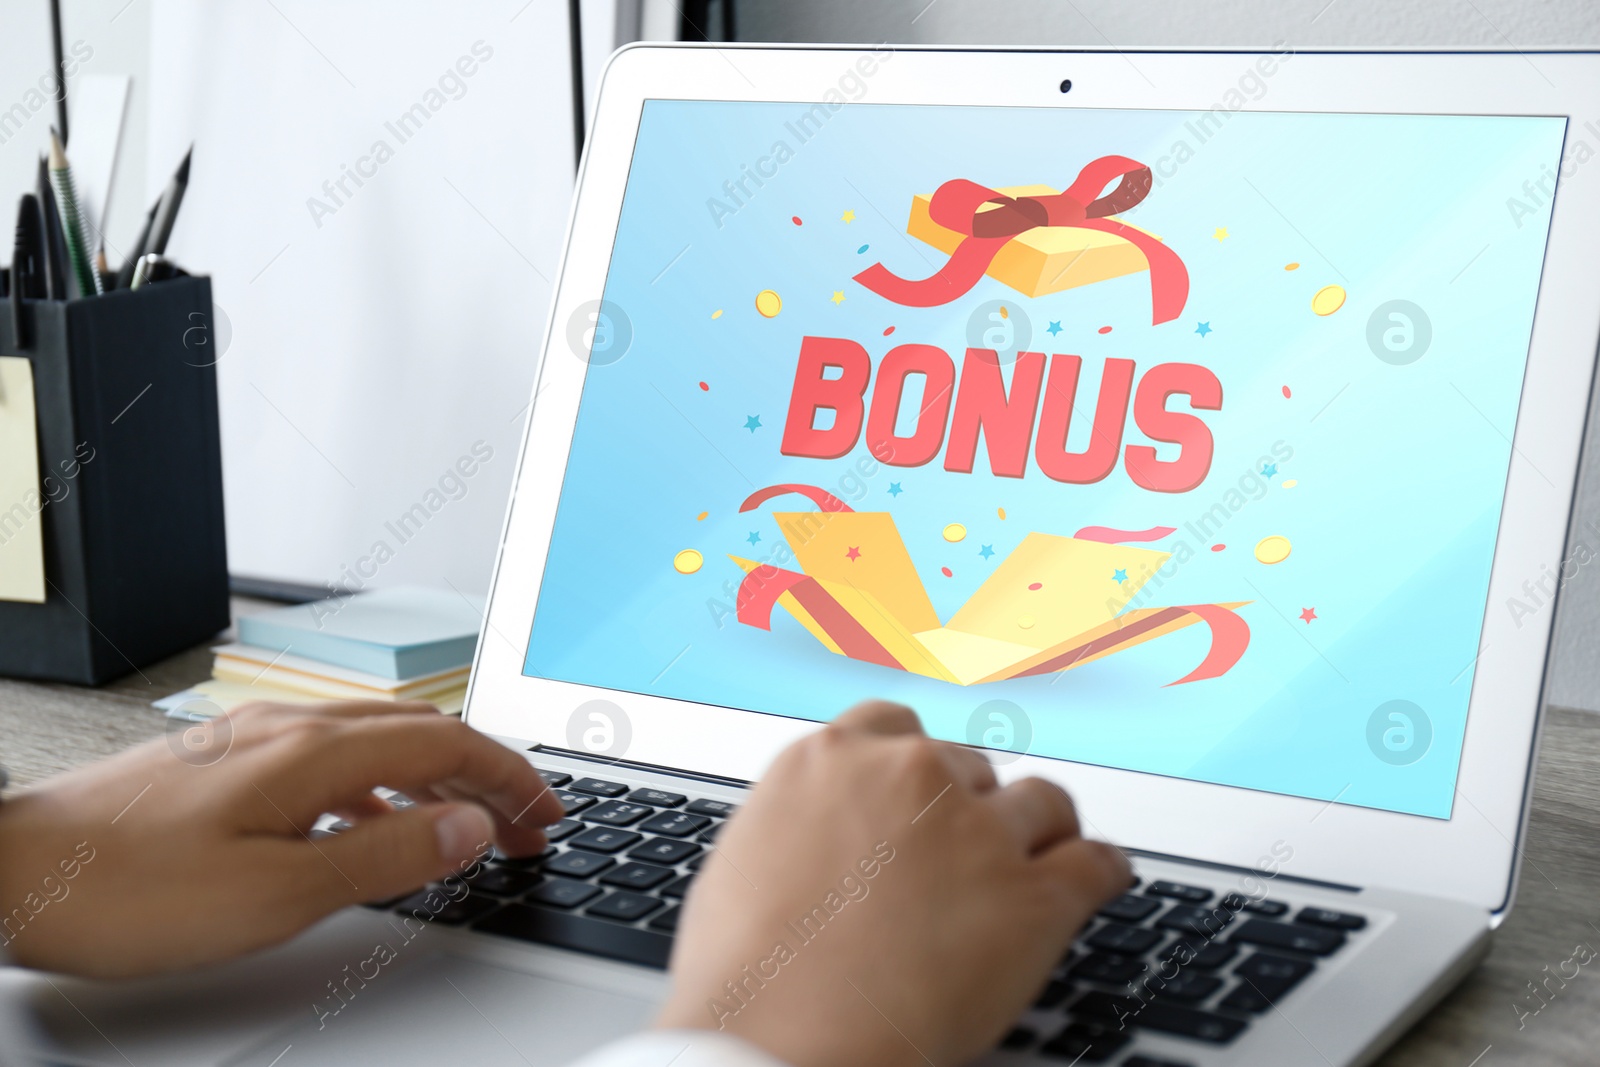 Image of Bonus gaining. Woman using laptop with at table, closeup. Illustration of open gift box, word and confetti on device screen